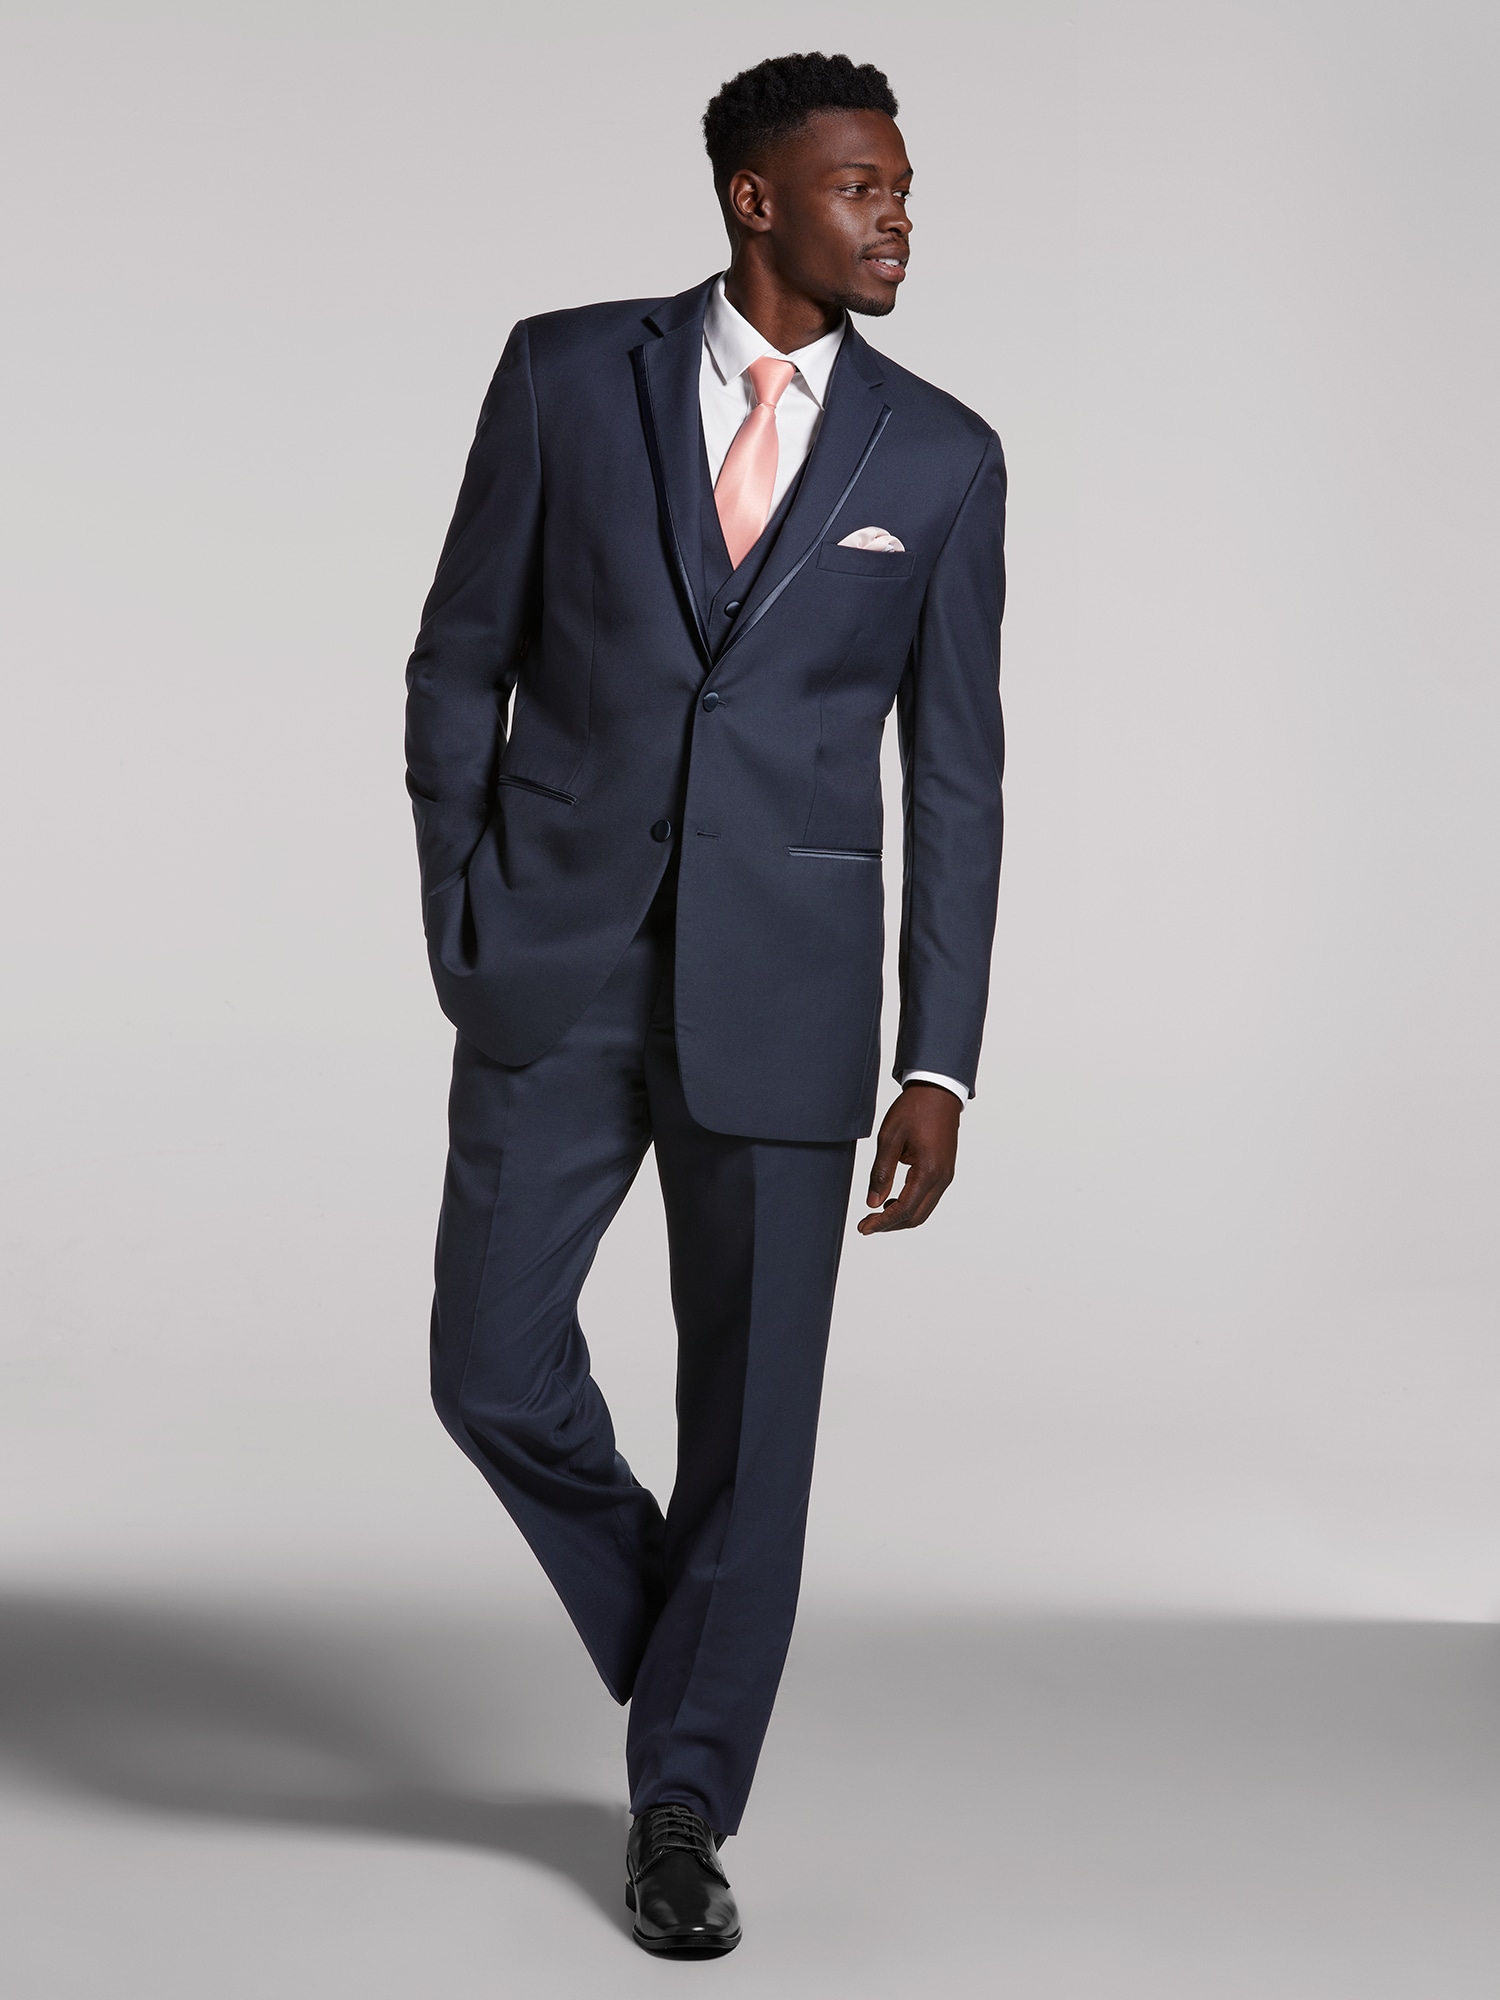 Navy Blue and Gray Suits